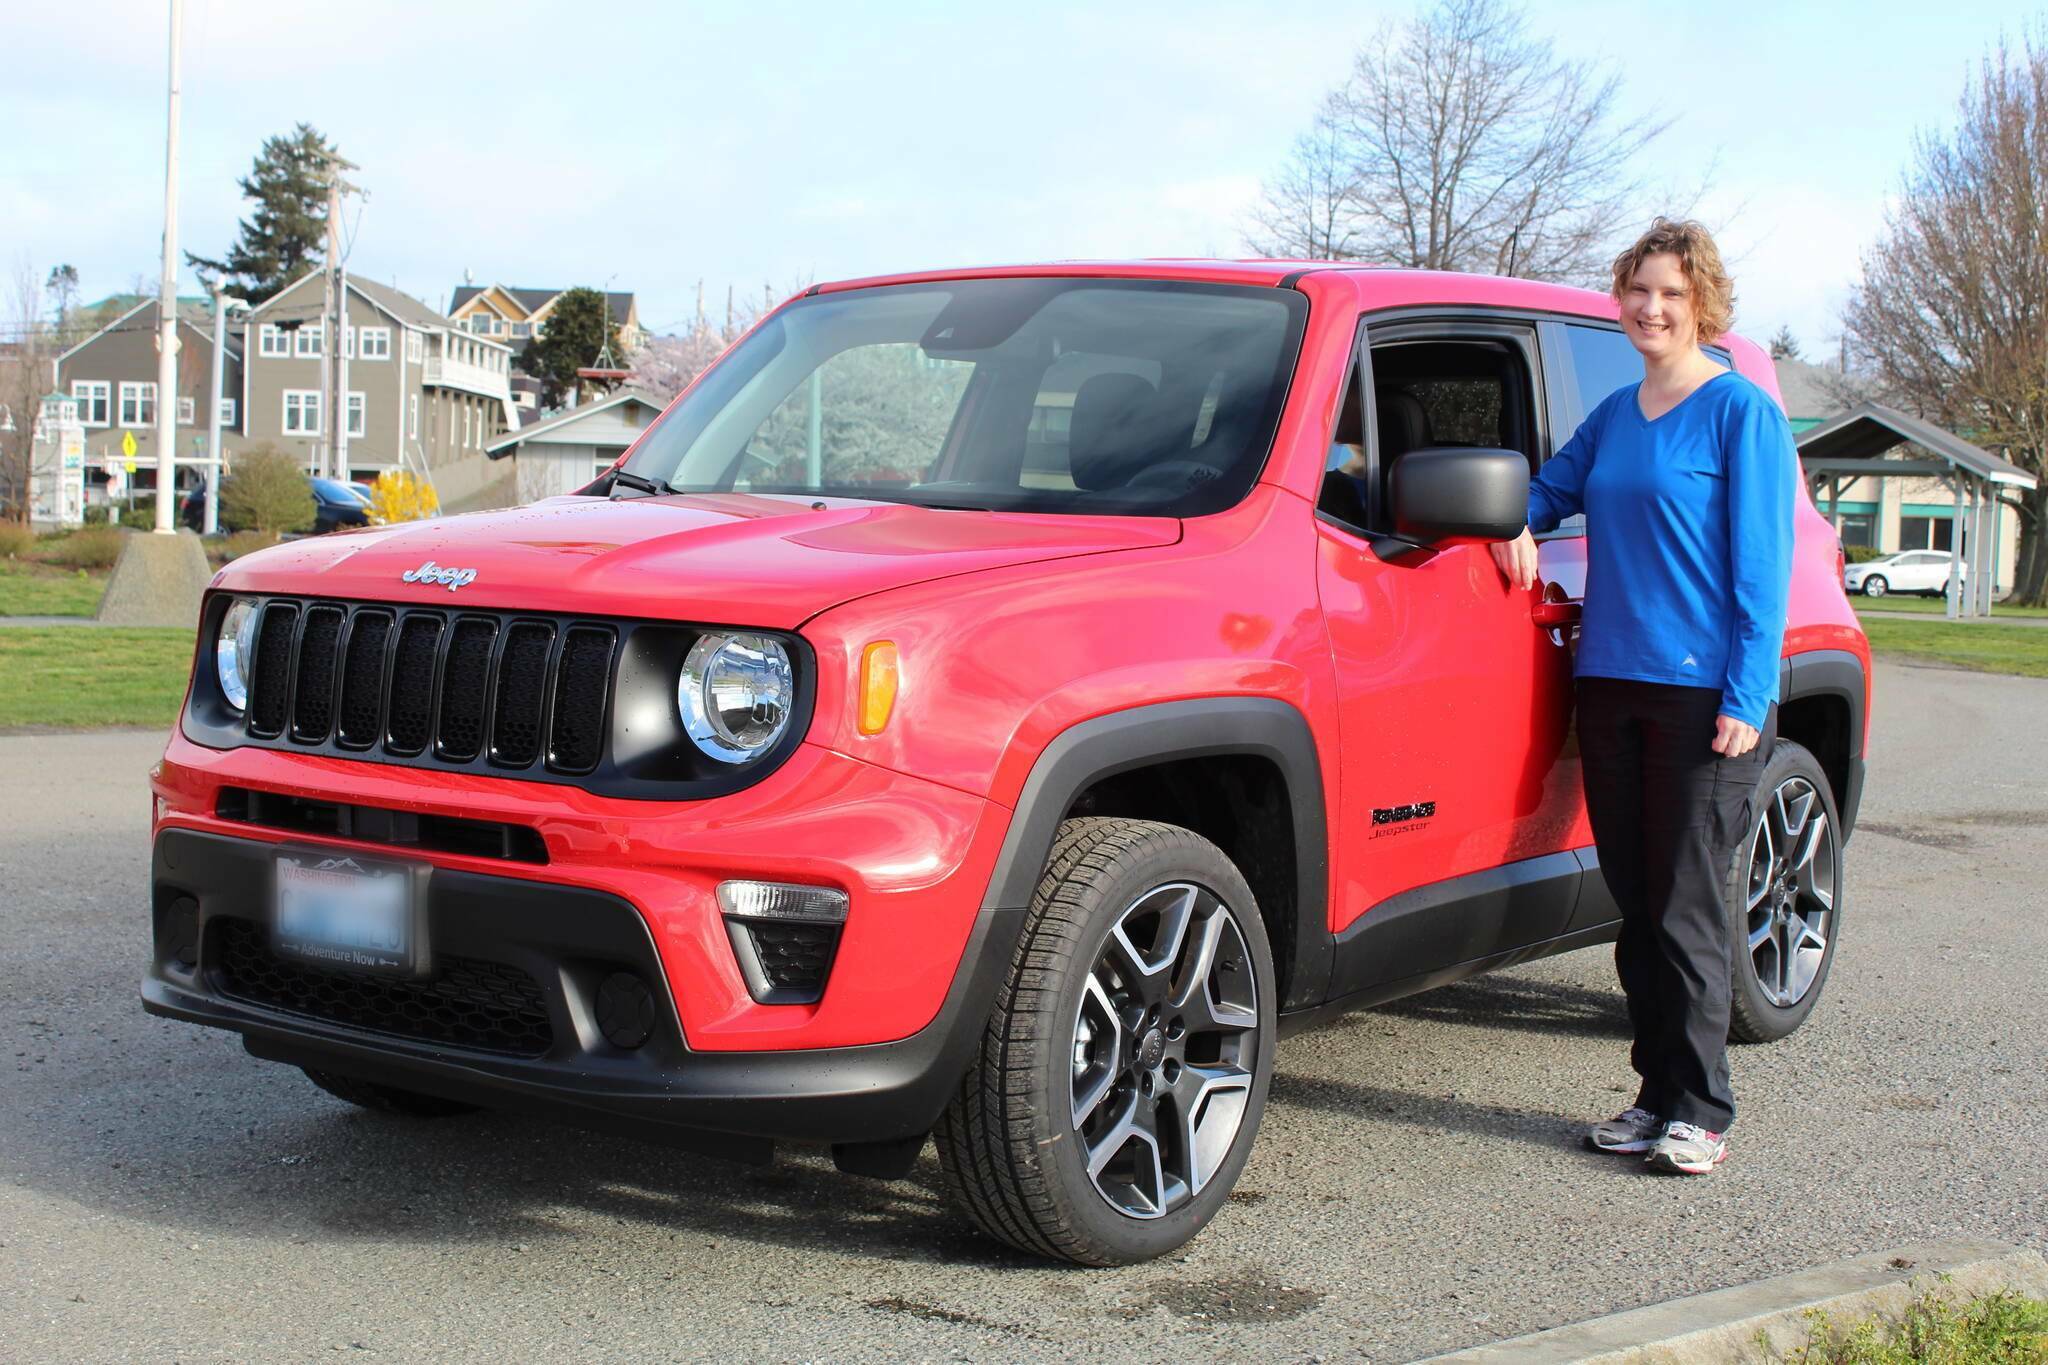 Photo by Karina Andrew/Whidbey News-Times
Natasha Vanderlinden won a new Jeep Renegade in a Bloodworks Northwest sweepstakes sponsored by Haselwood Auto Group. Vanderlinden, who has donated blood more than 30 times, was inspired to give by the statistic that one pint of blood could potentially save up to three lives.